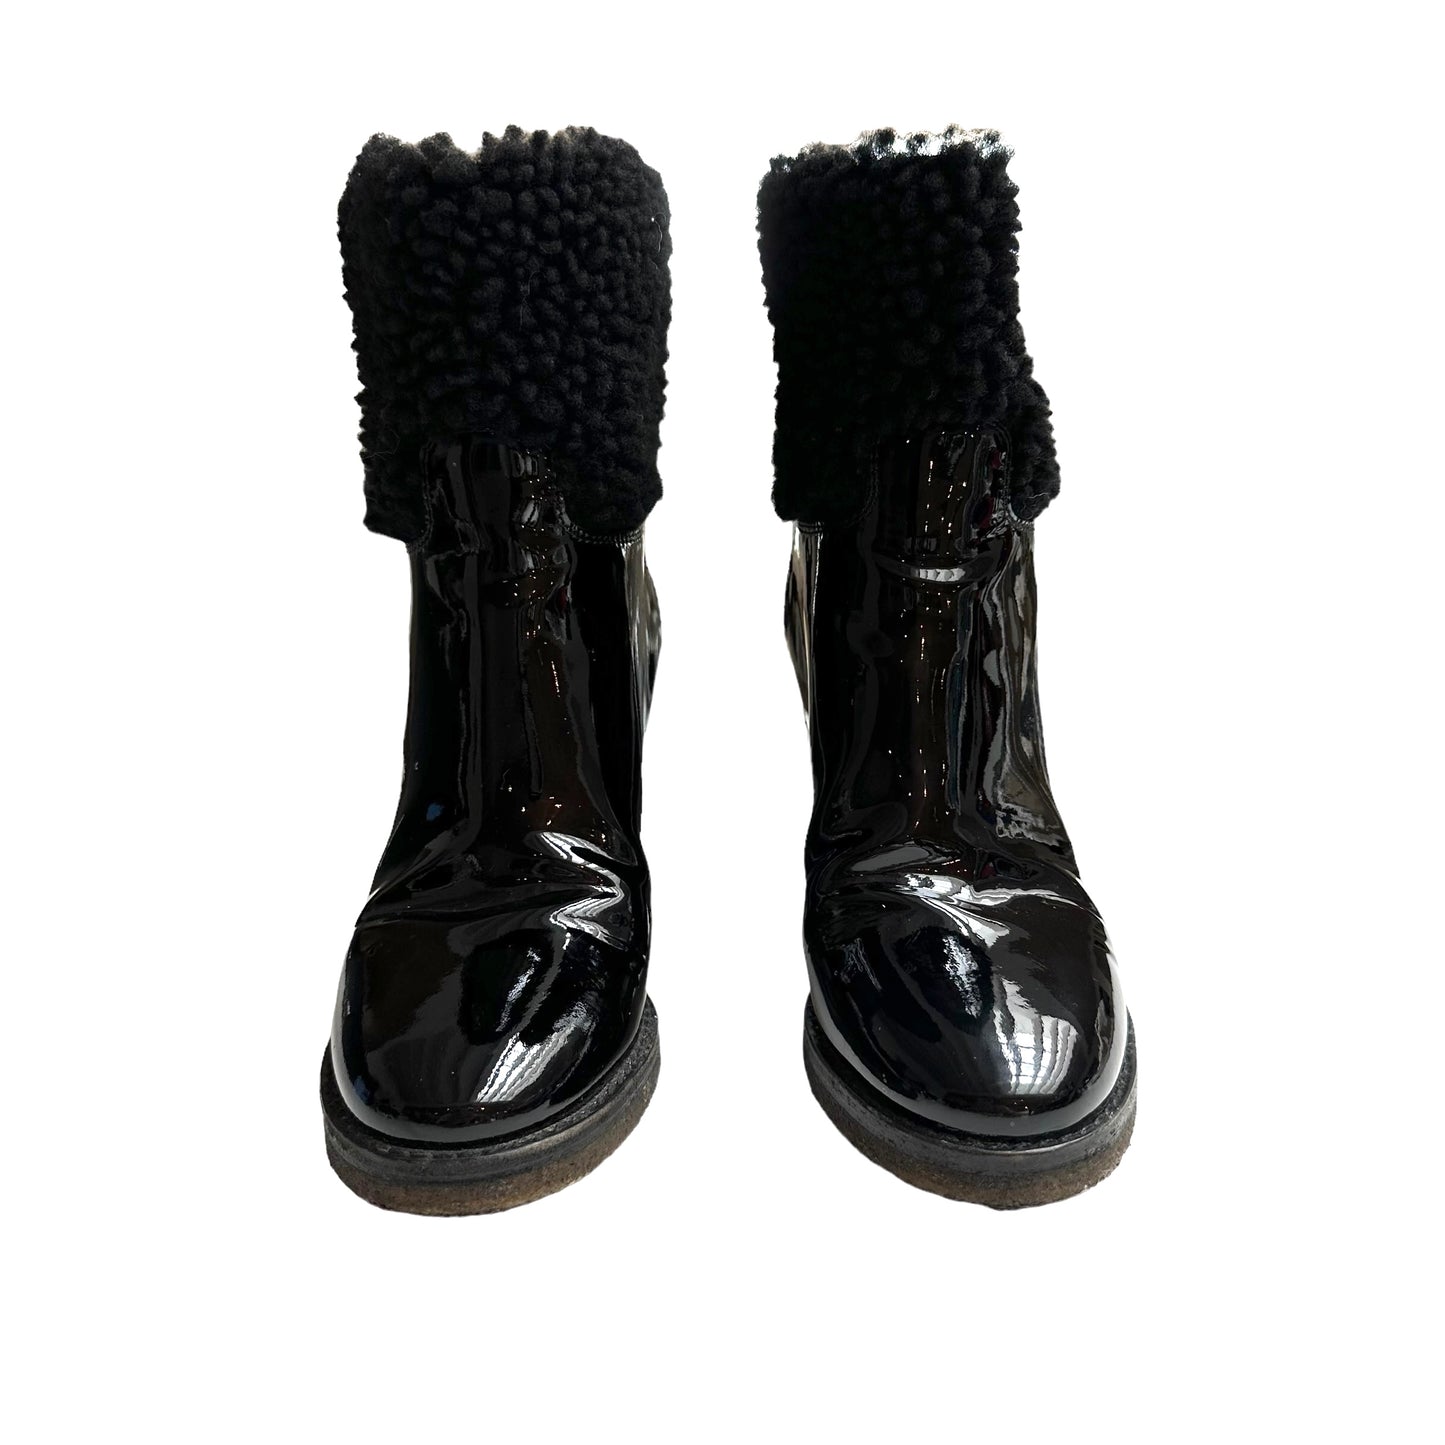 Black Patent Leather & Shearling Boots - 7